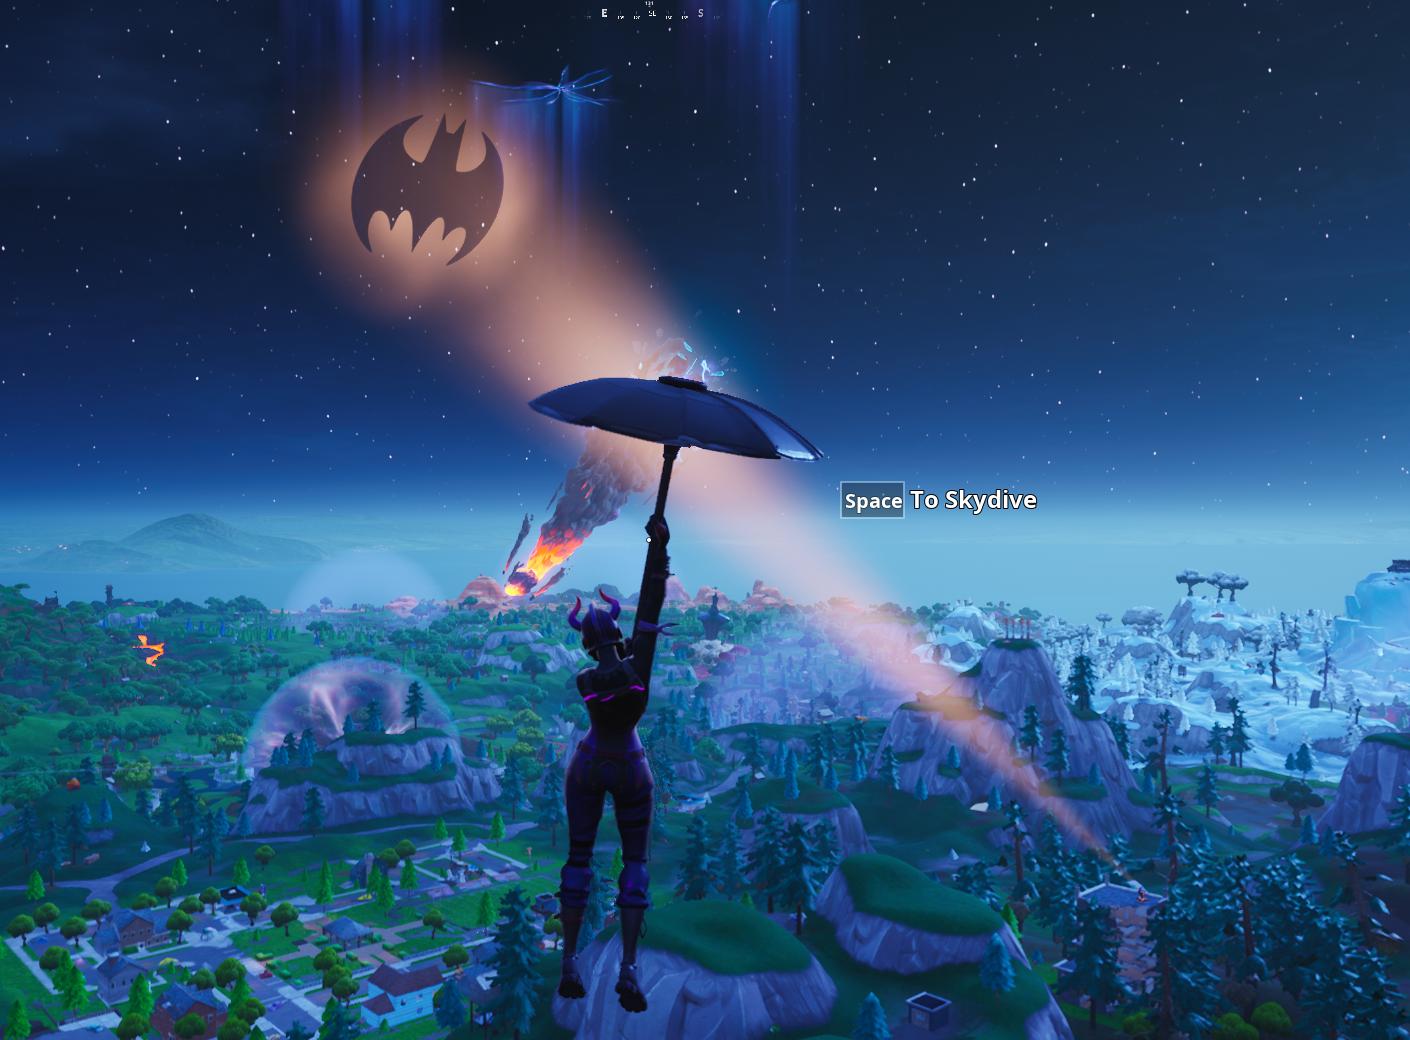 Fortnite x Batman - Cosmetics, Gotham City POI, Weapons and More Coming to Fortnite